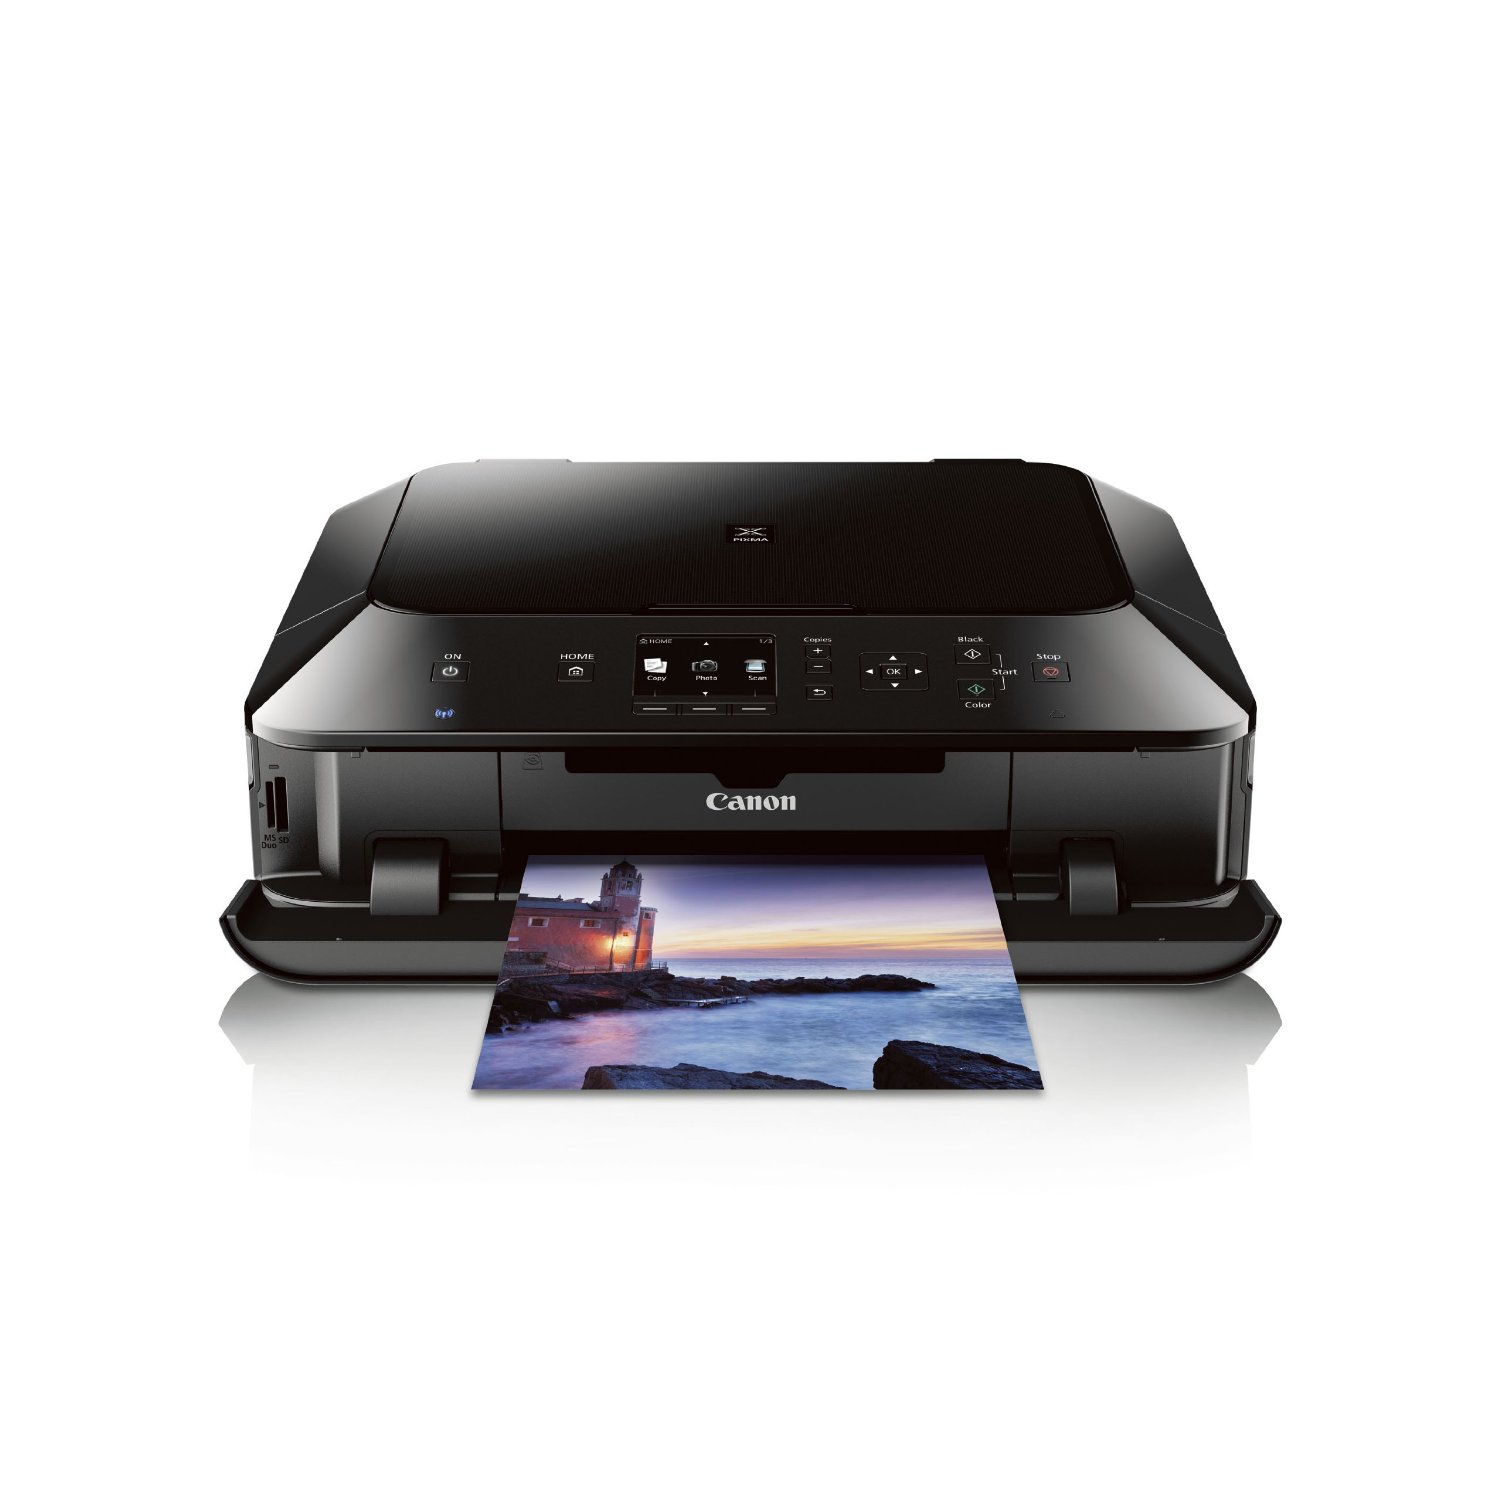 Canon Mg3200 Scanner Manual : Free Programs, Utilities and ...